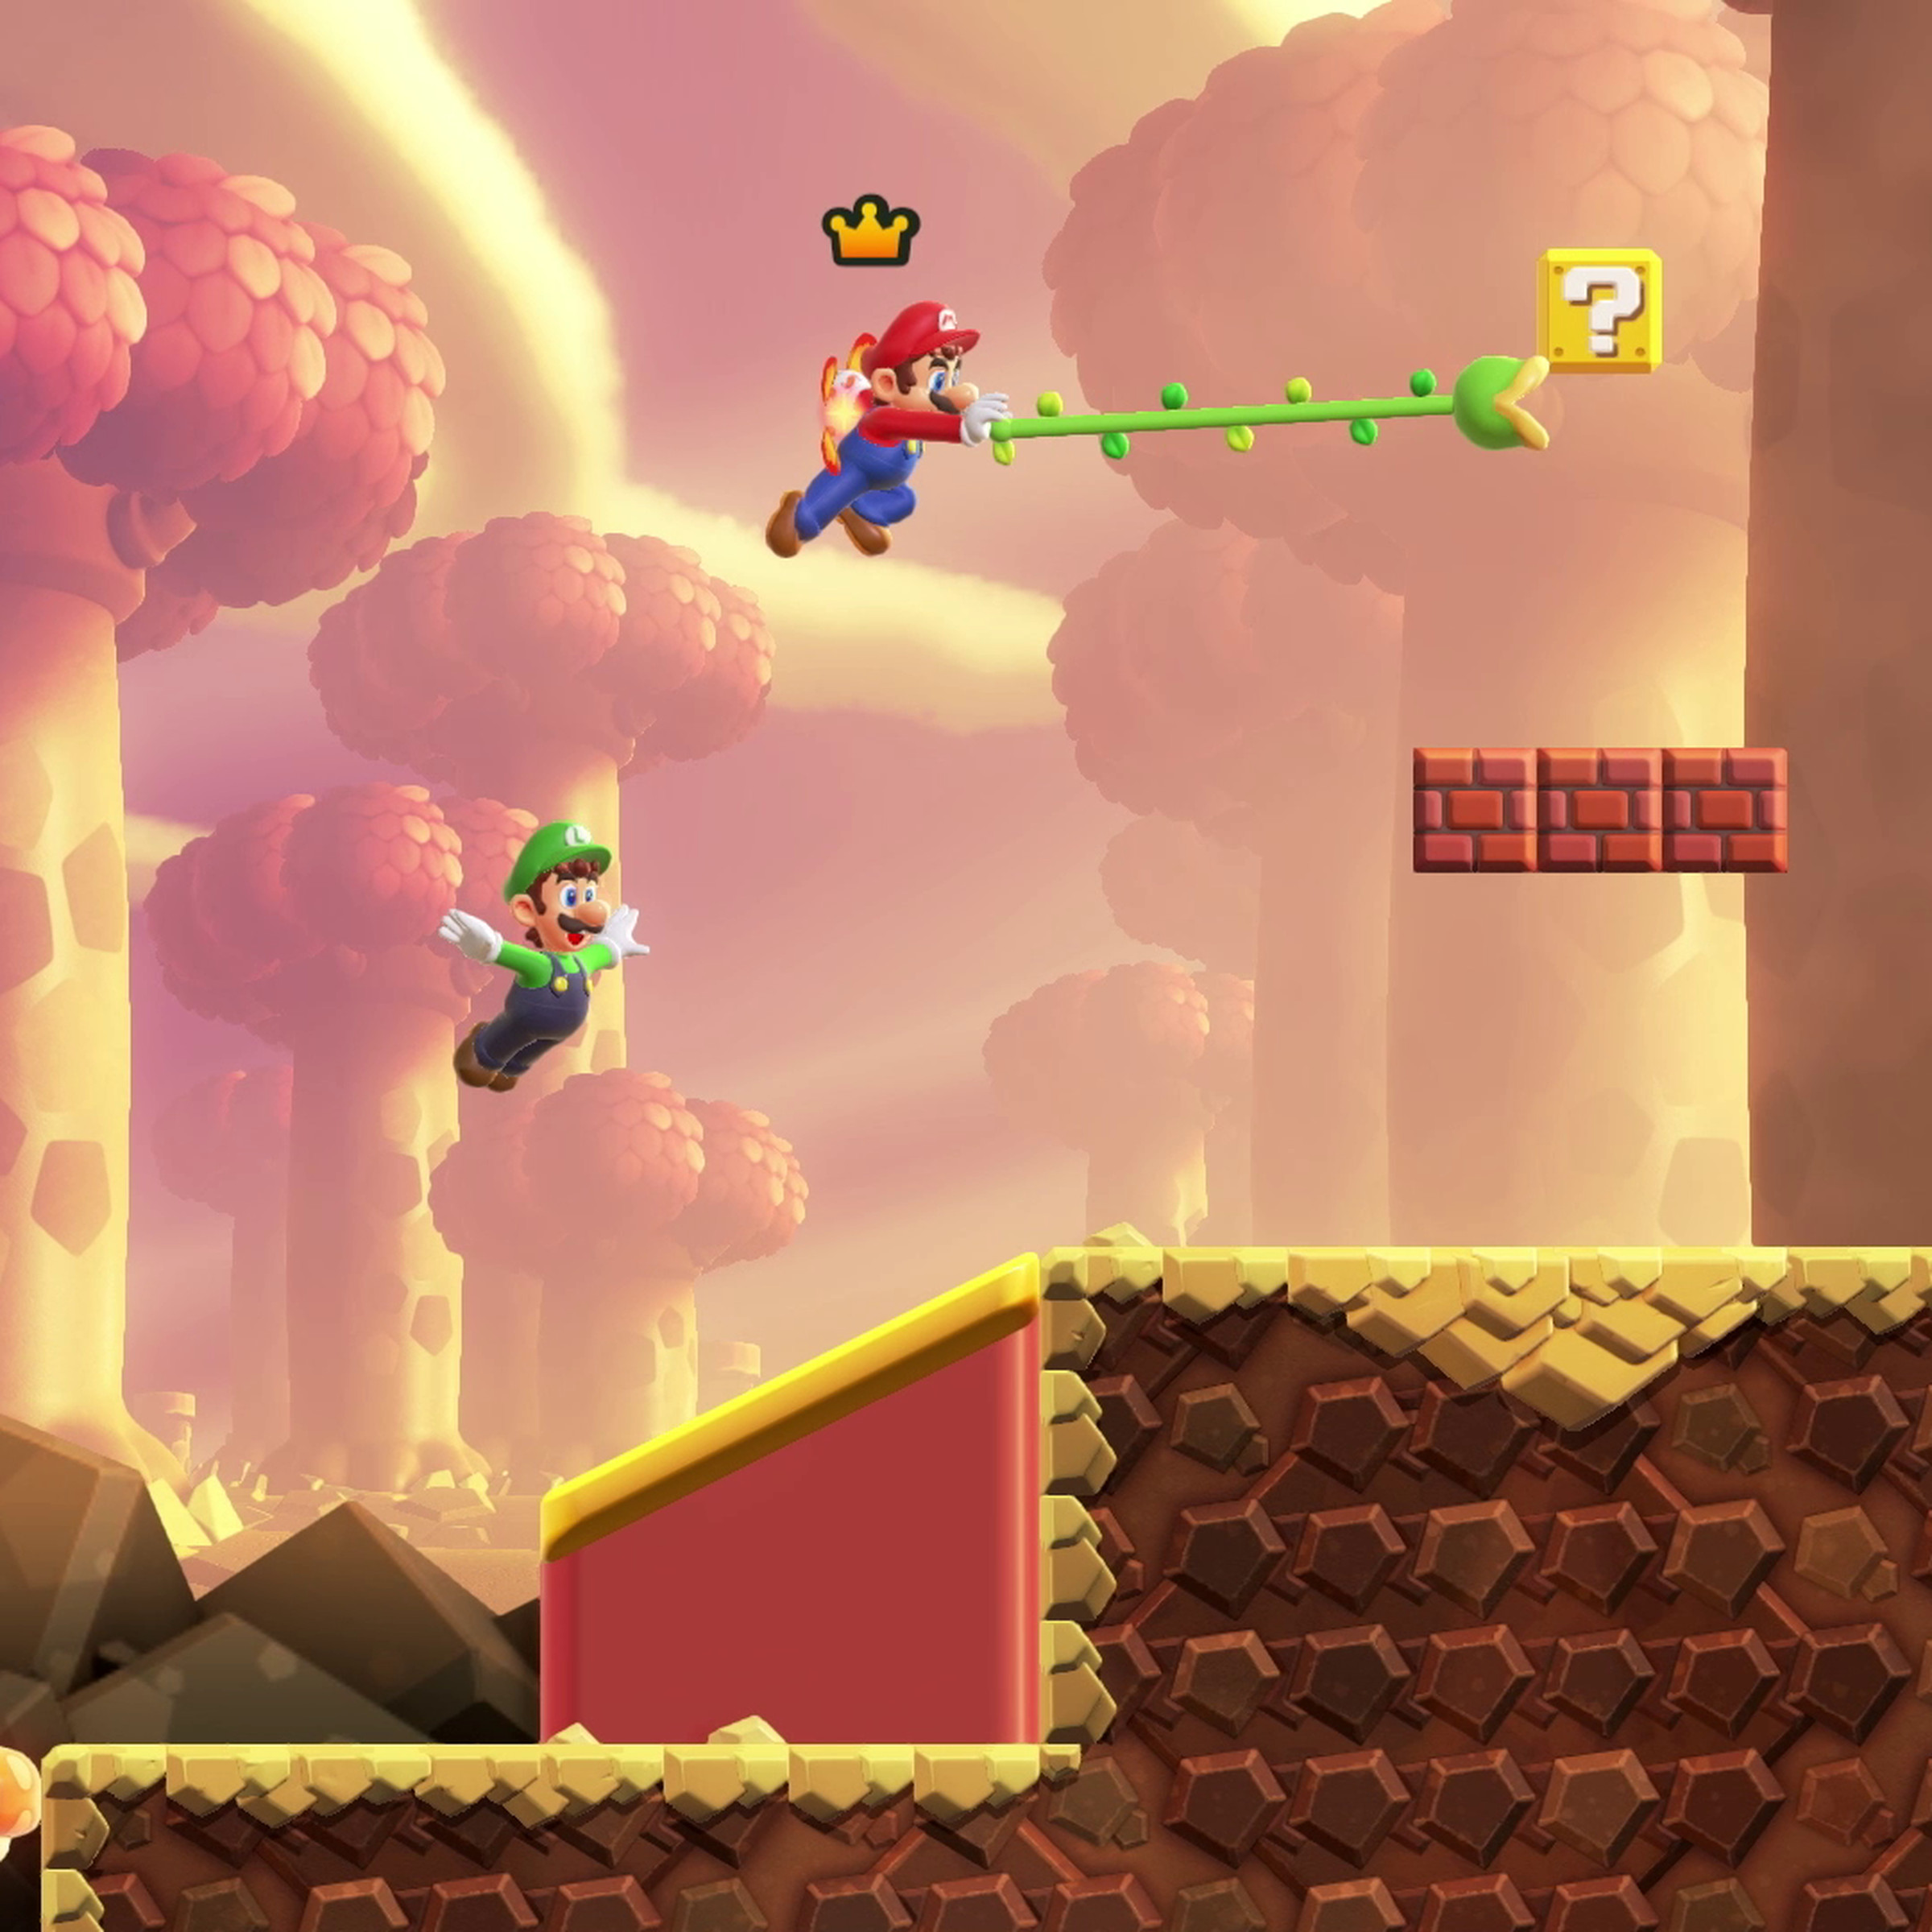 A screenshot from the video game Super Mario Bros. Wonder, in which Mario uses a vine like a grappling hook.